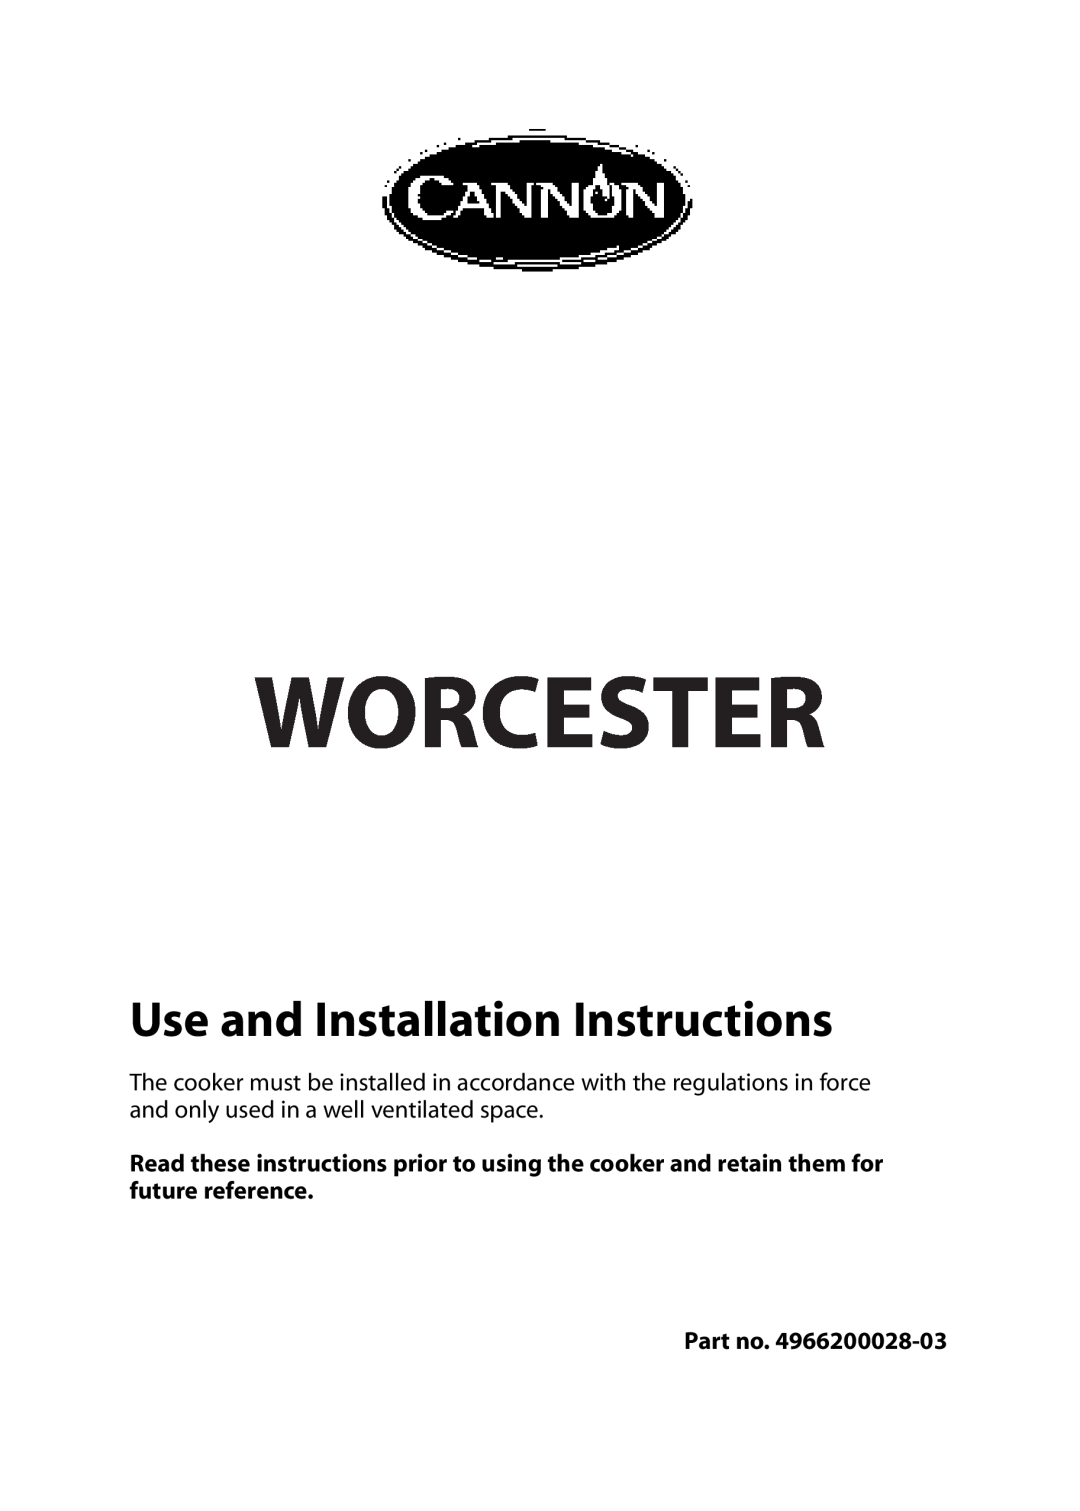 Cannon 10525G, 10526G, 10520G installation instructions Worcester, Use and Installation Instructions 